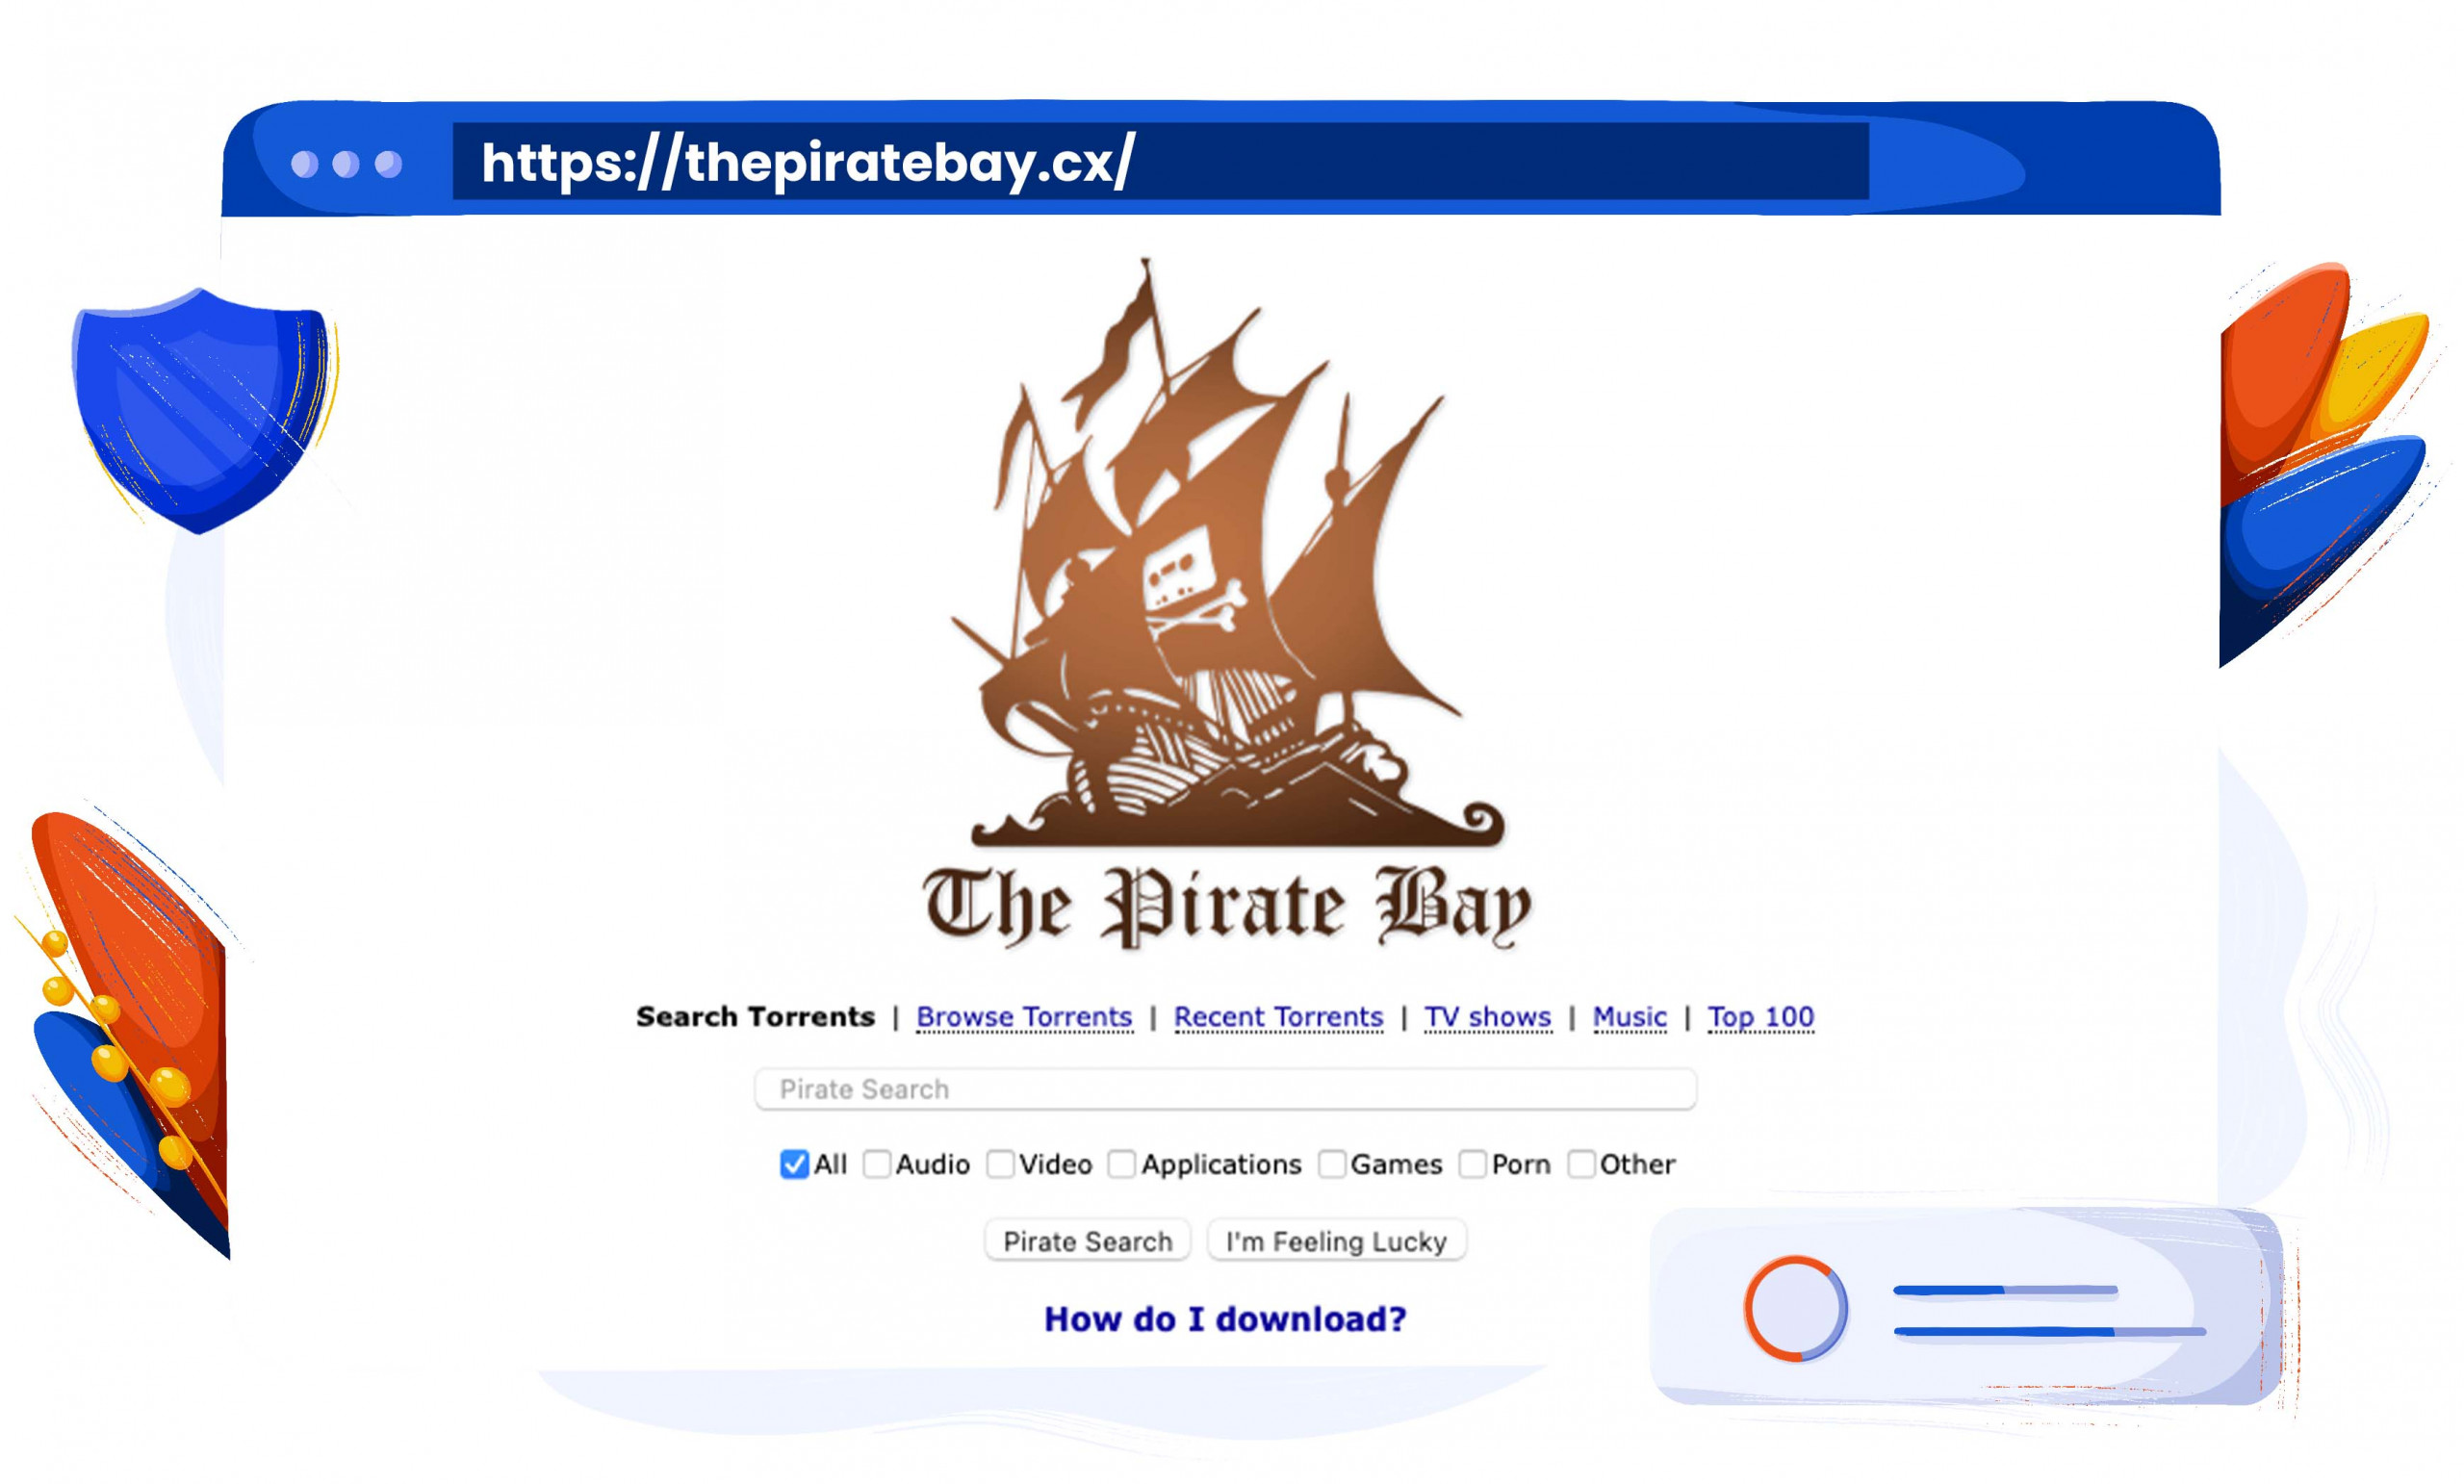 The Pirate Bay is one of the first torrenting sites